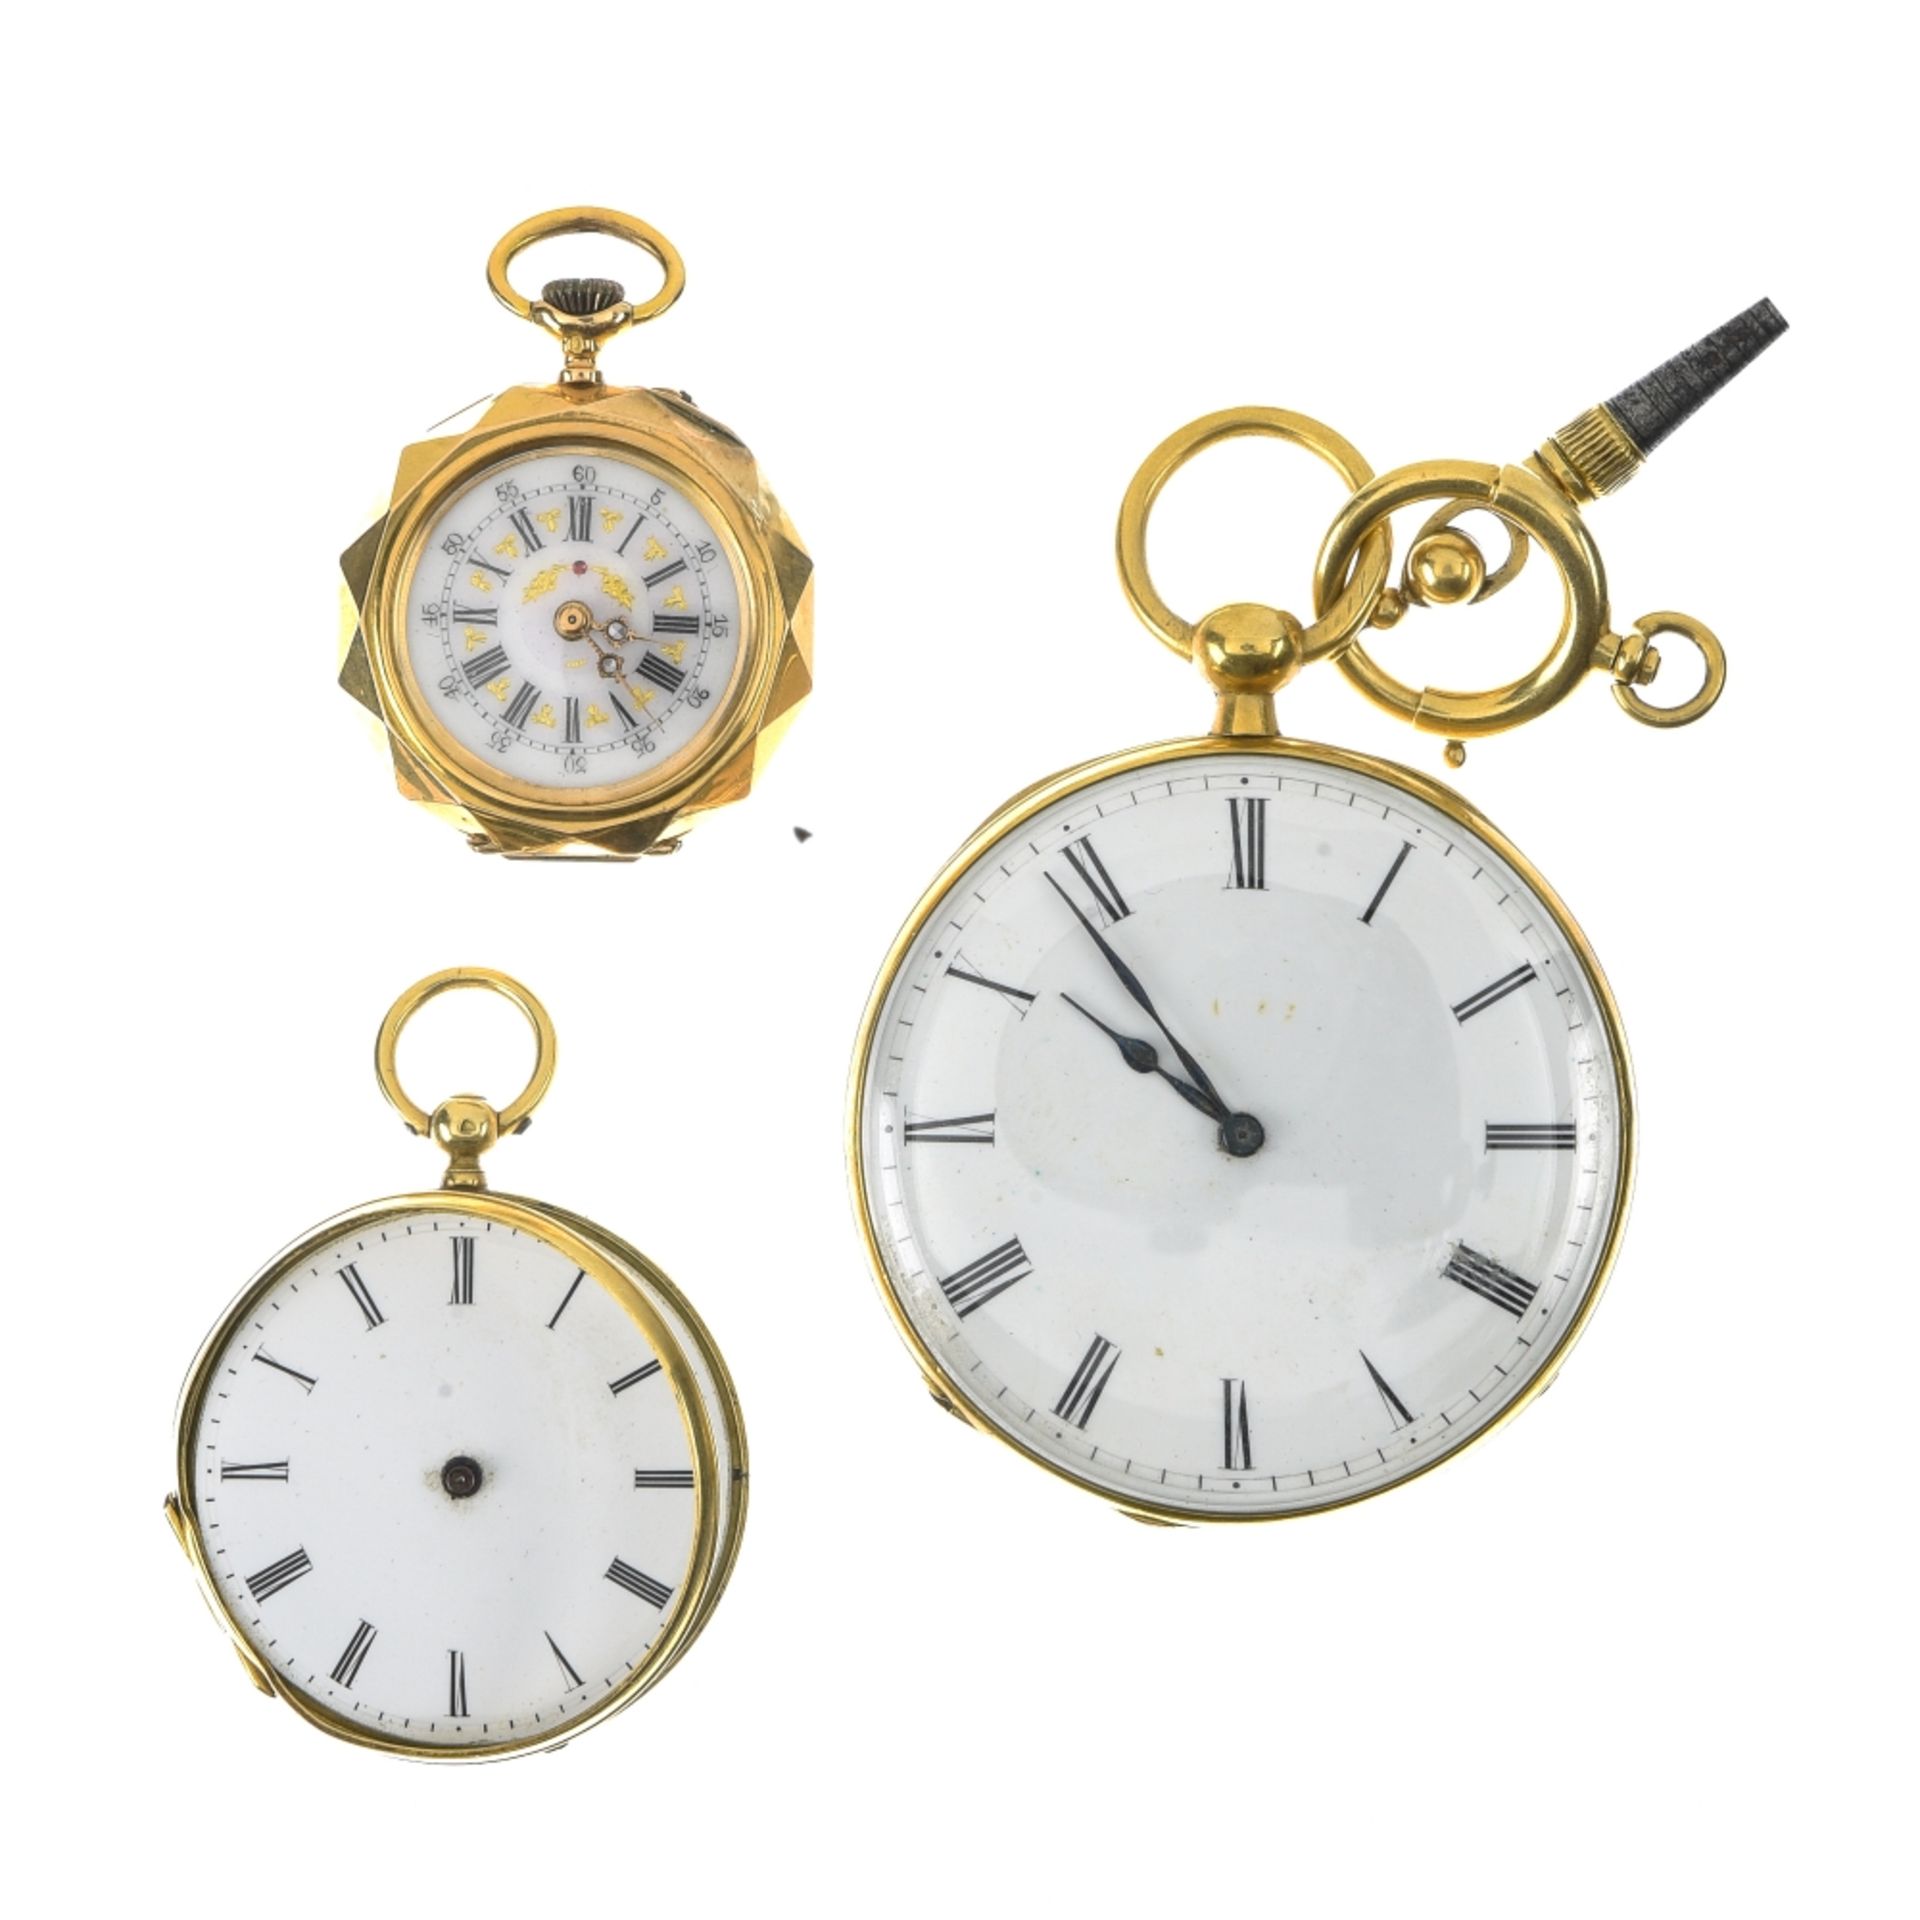 Lot of 3 fob watches 1. 18k gold fob watch Porcelain dial with Roman numerals and external rail